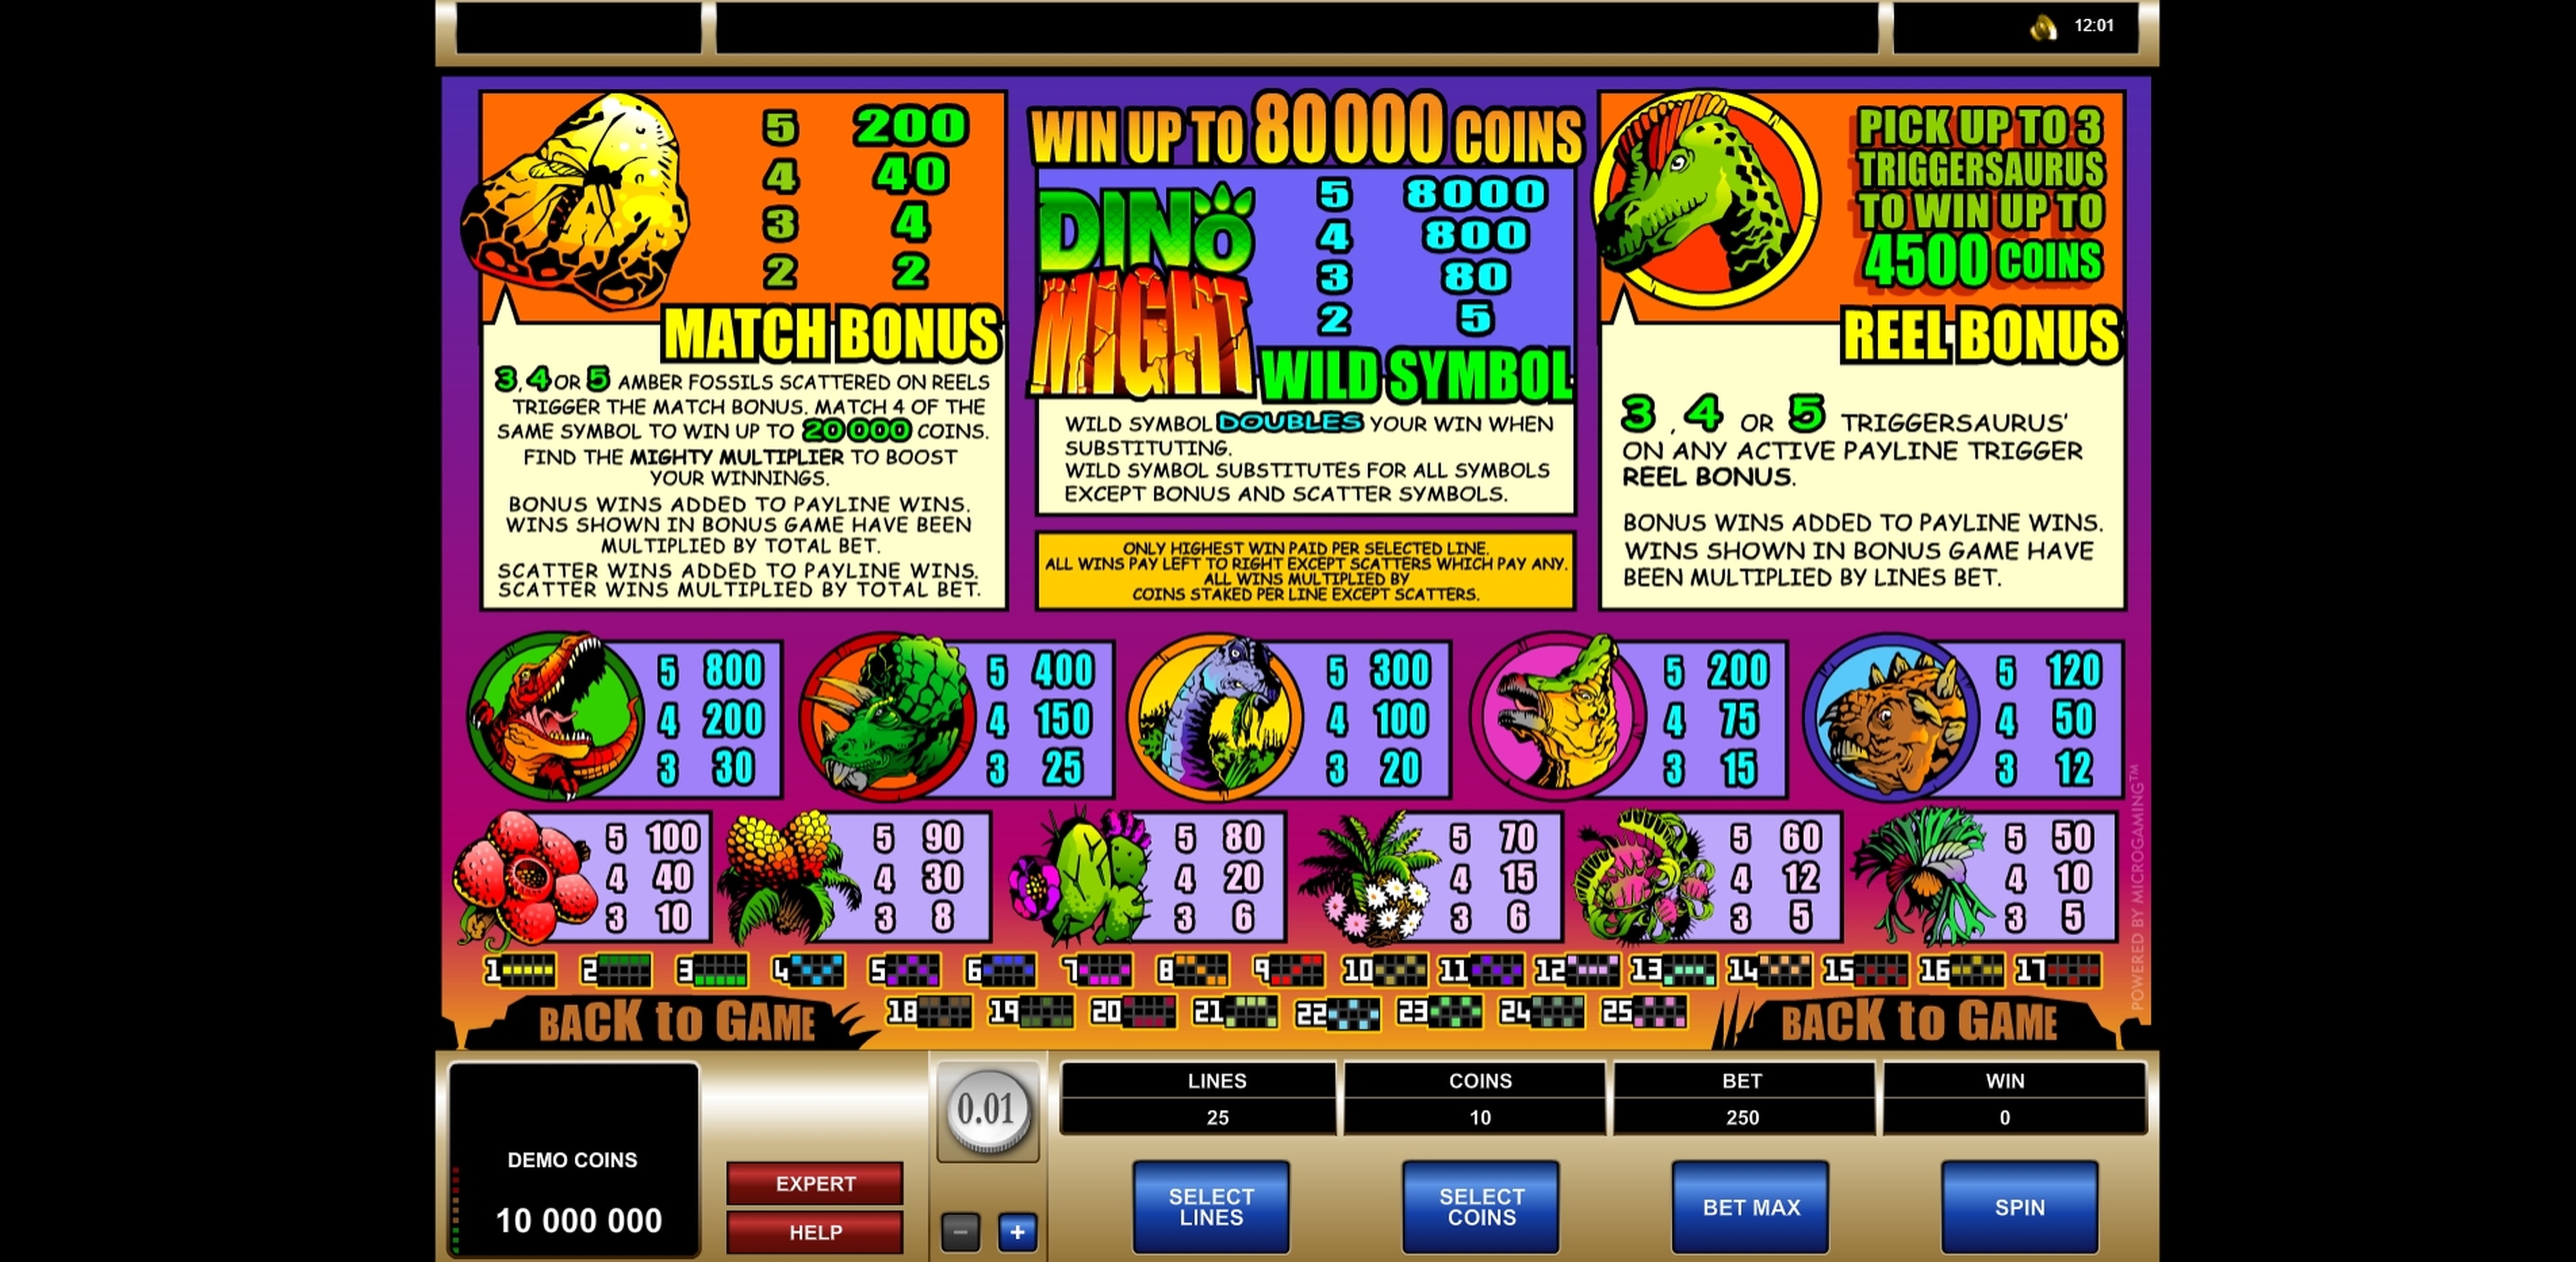 Info of Dino Might Slot Game by Microgaming